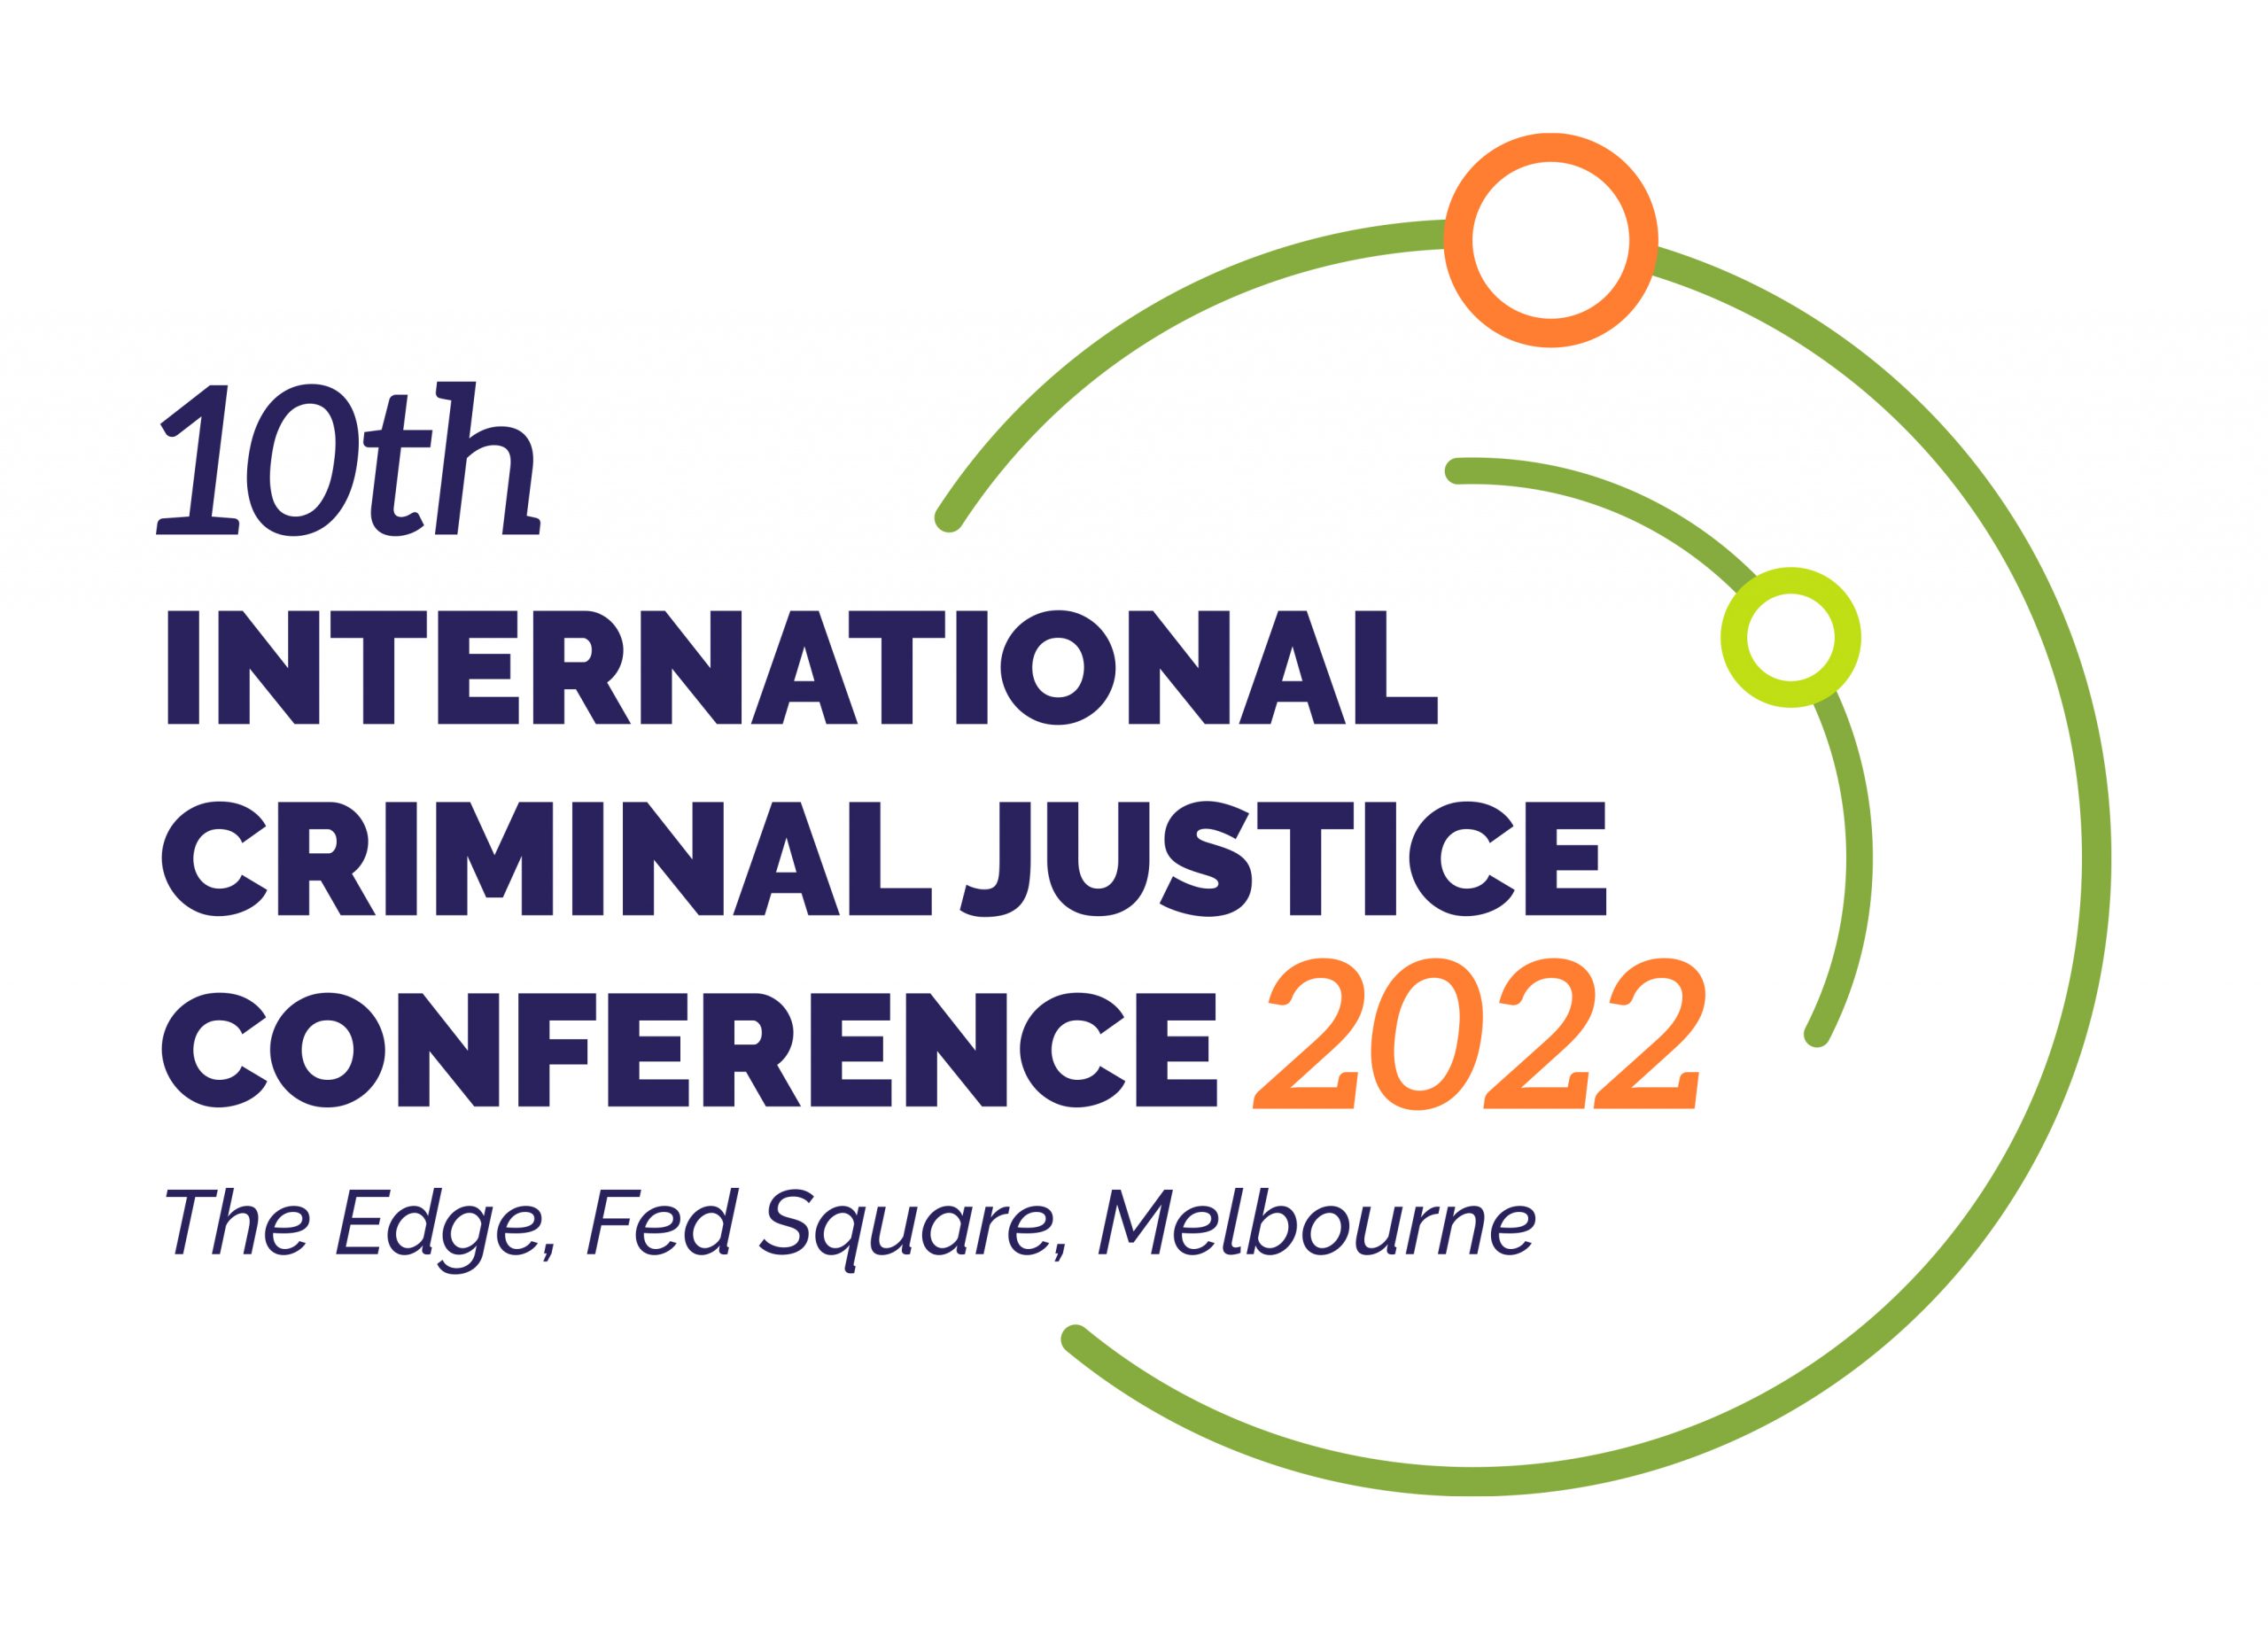 10th International Criminal Justice Conference 2022 – Call for Abstracts